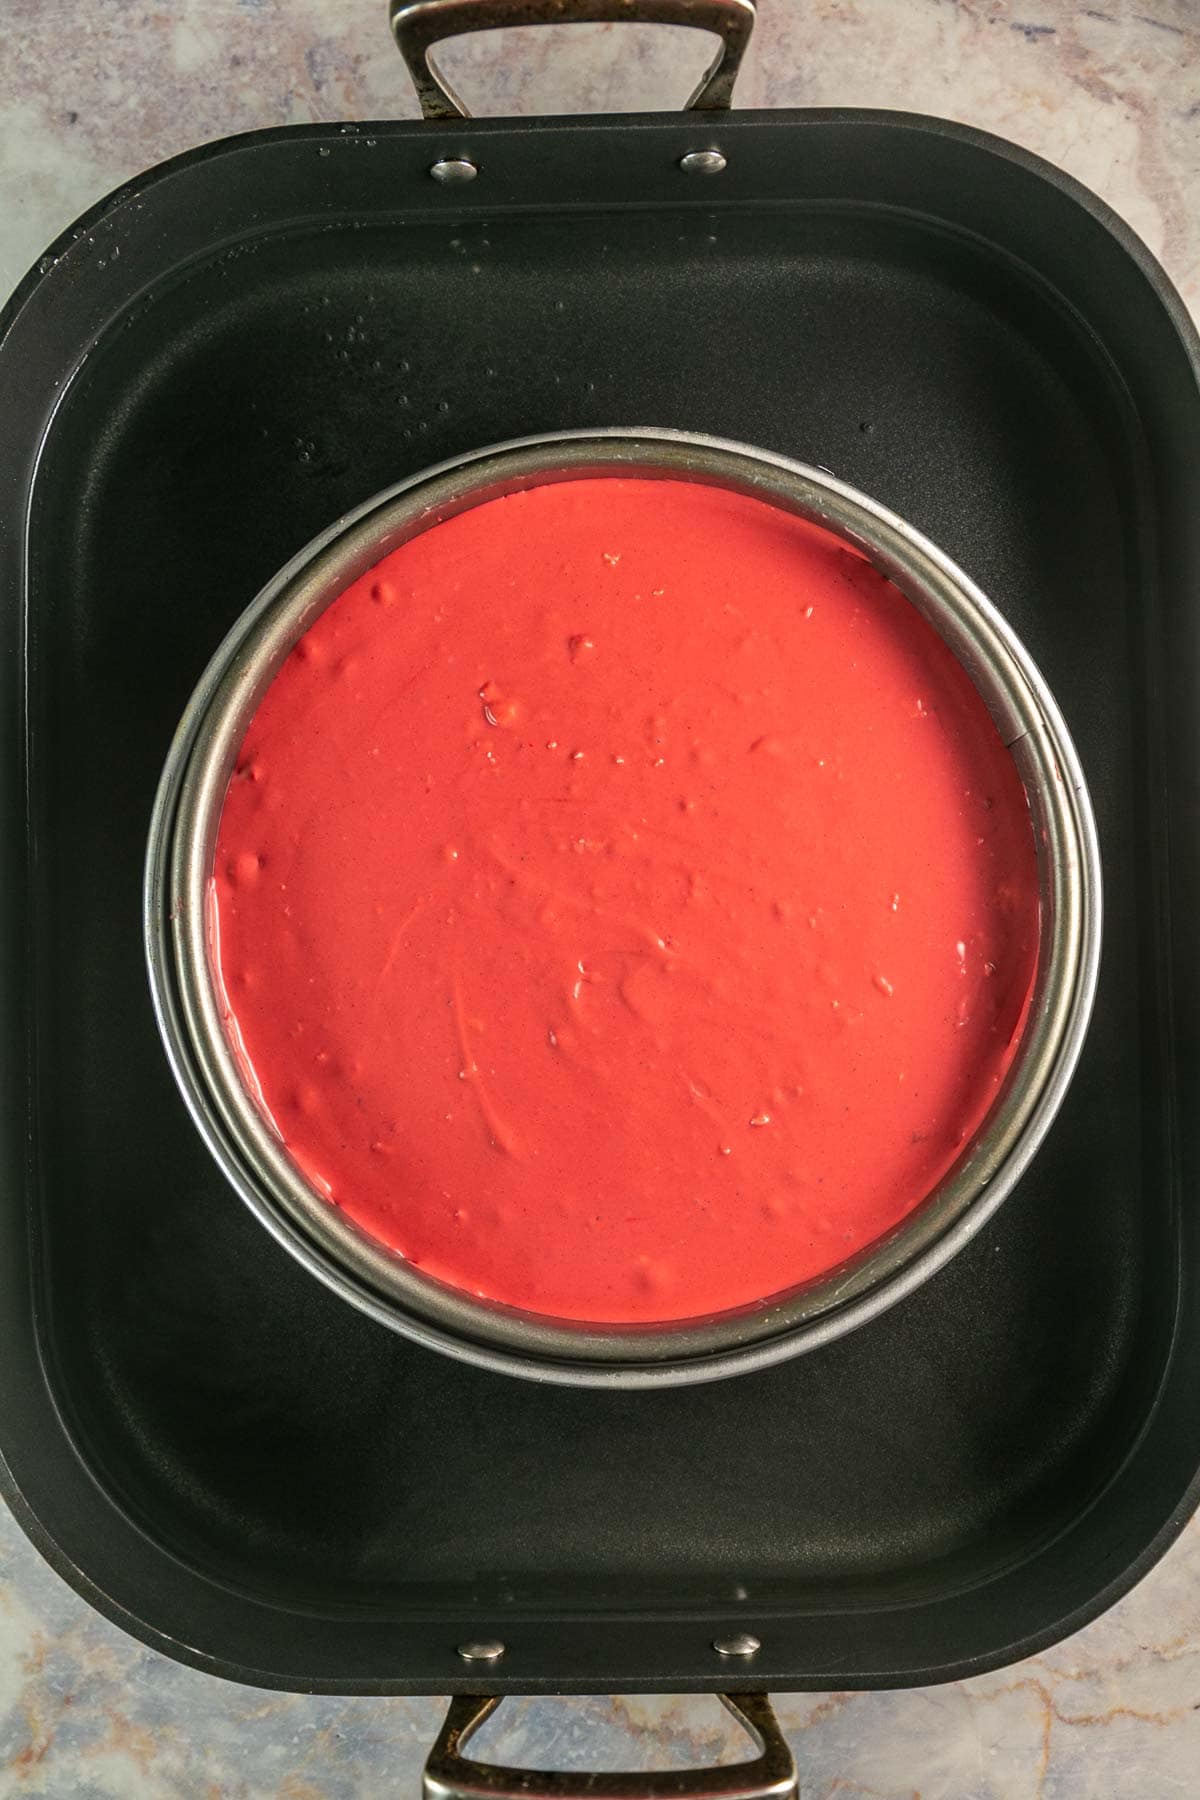 unbaked cheesecake sitting in a water bath